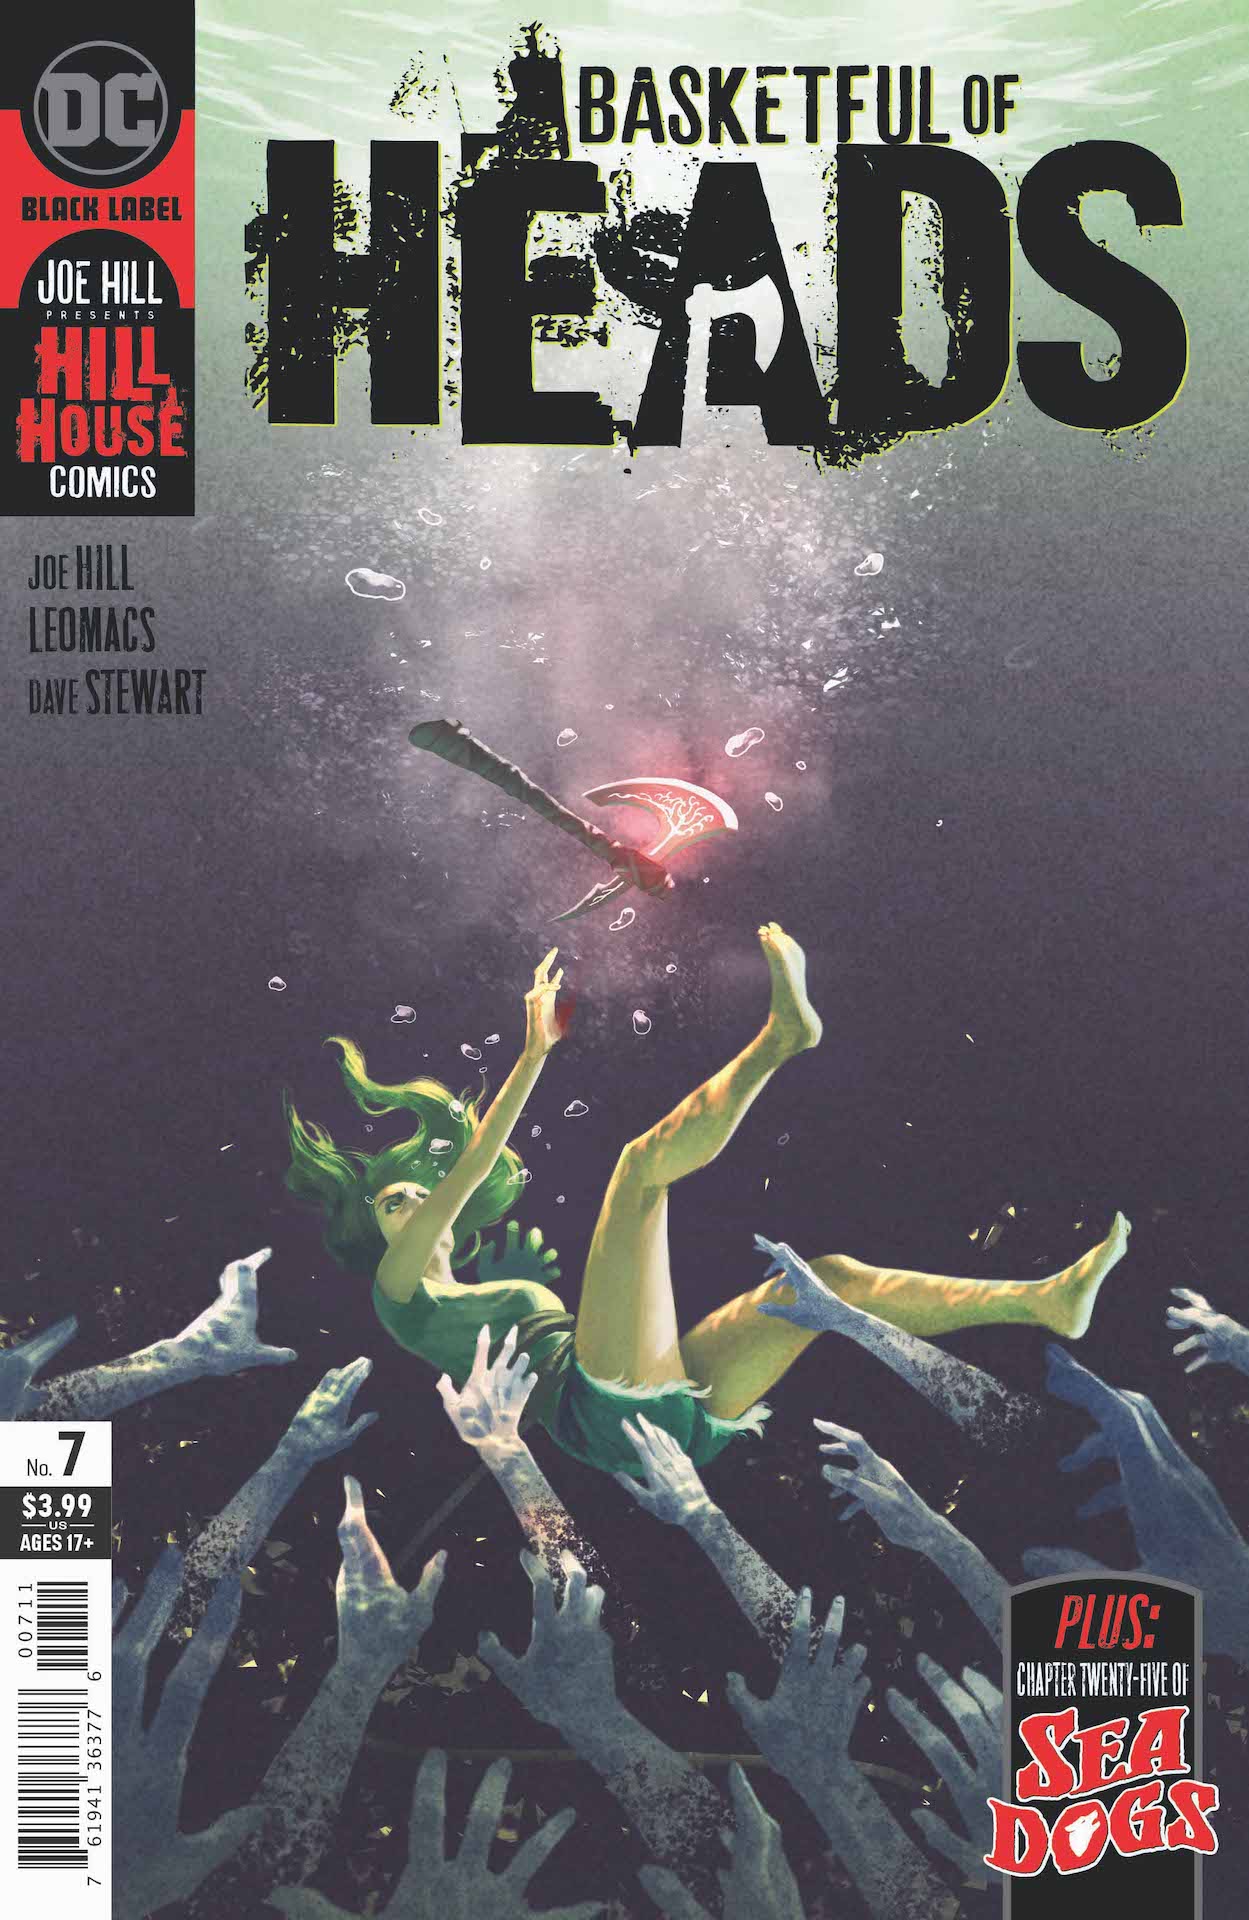 DC Preview: Basketful of Heads #7